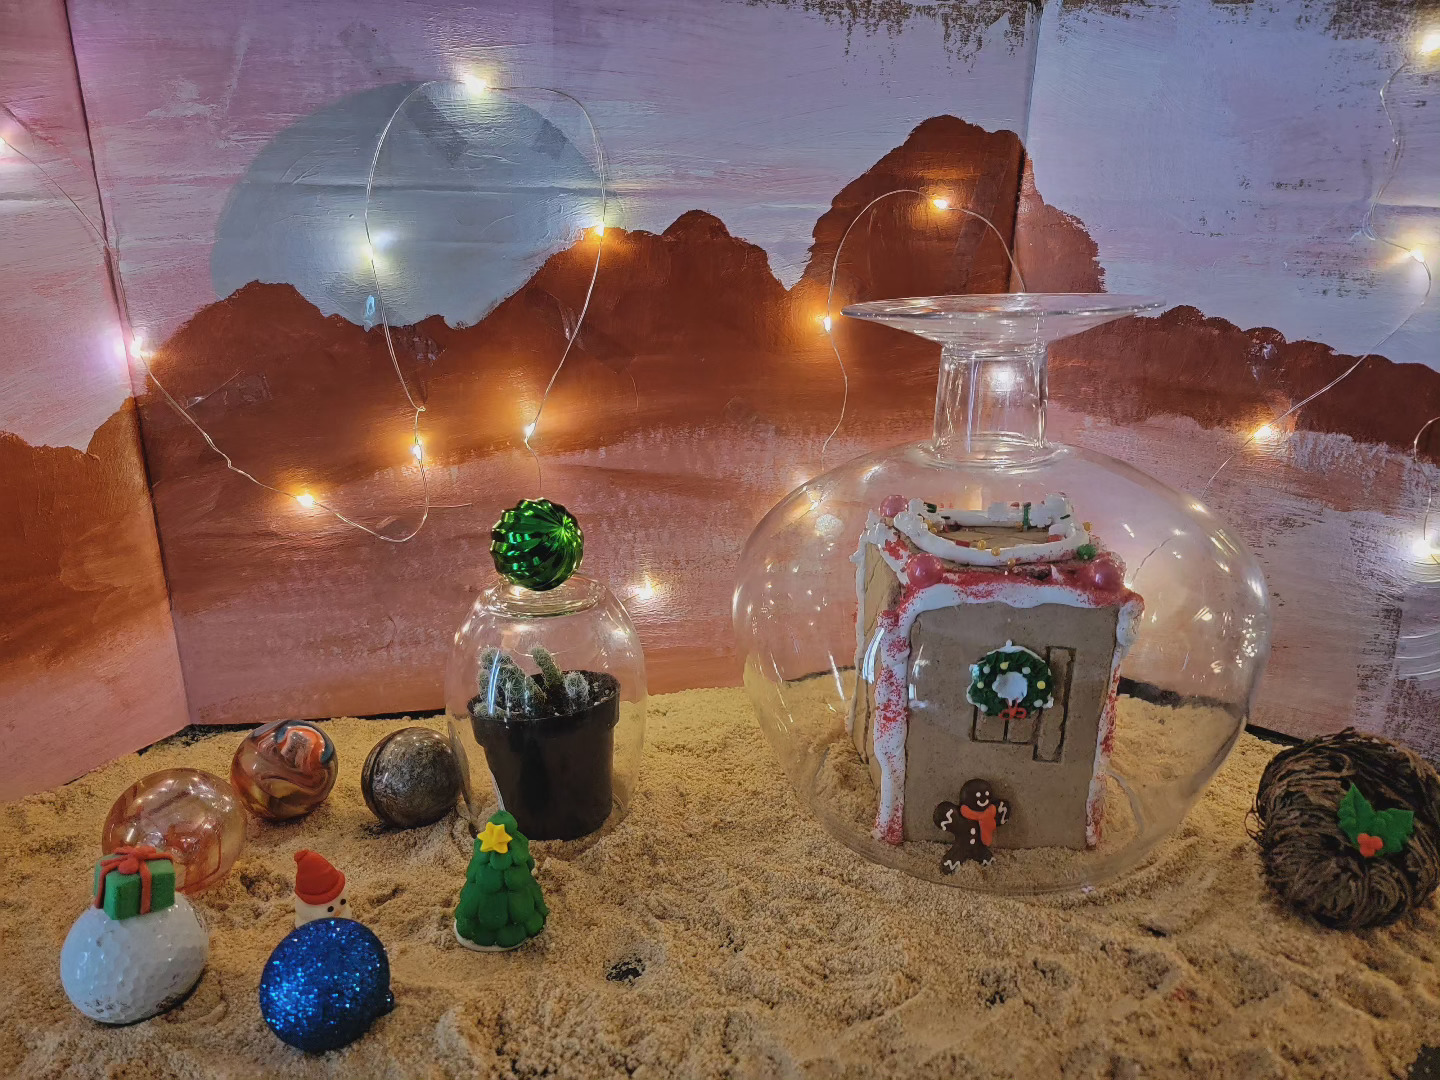 A gingerbread library is inside a glass dome with a painted Mars backdrop.